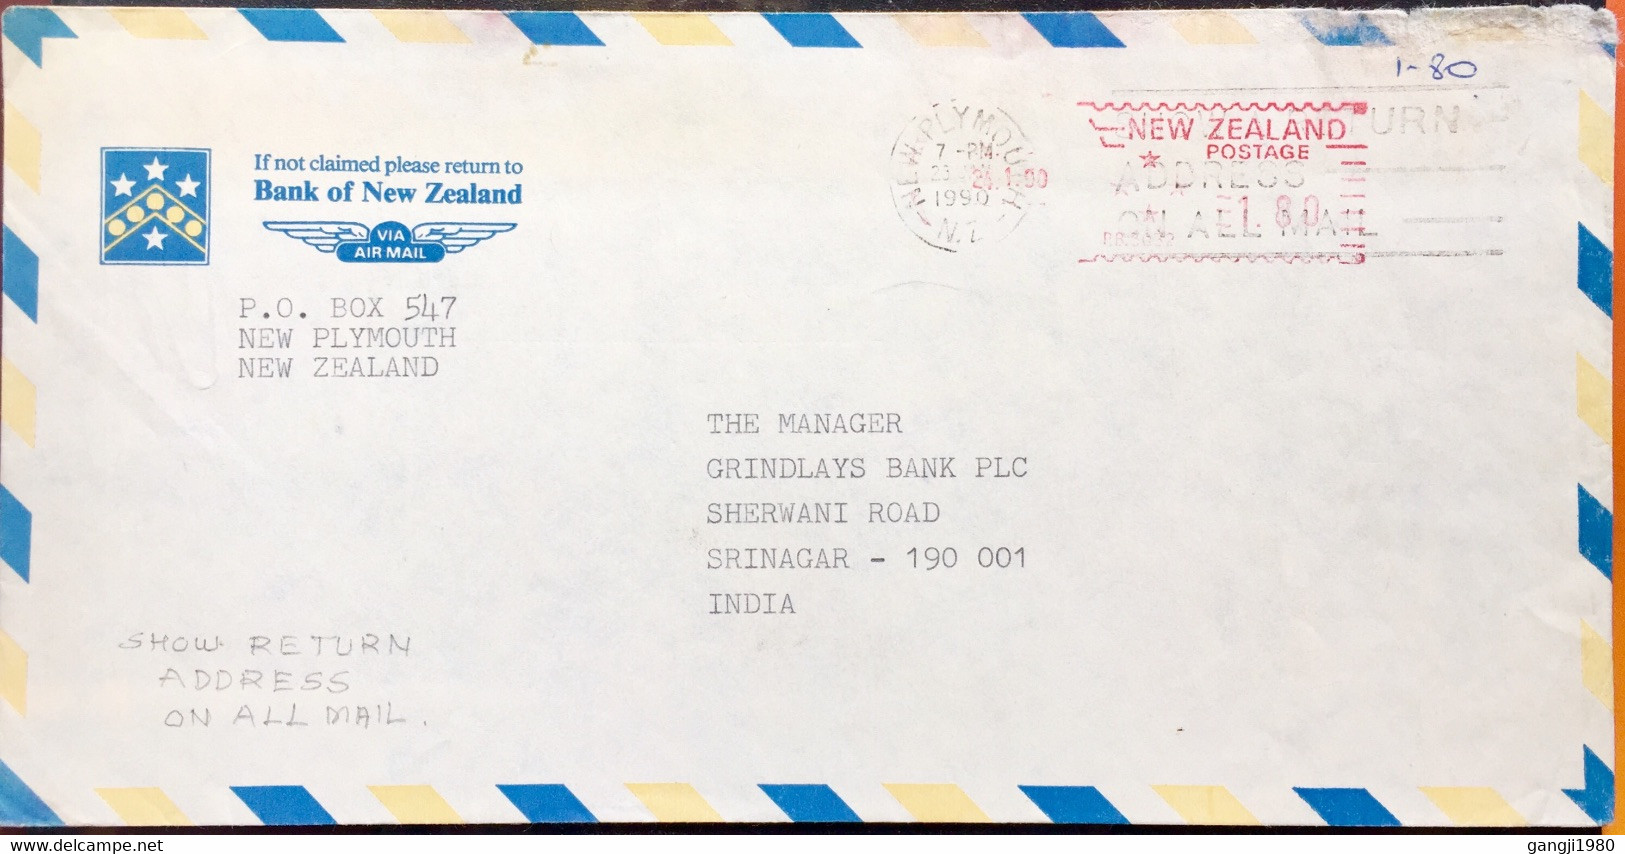 NEW ZEALAND 1990 SHOW RETURN ADDRESS ON ALL MAIL SLOGAN,NEW PLYMOUTH TO INDIA BANK OF NEW ZEALAND METER CANCELLATION - Covers & Documents